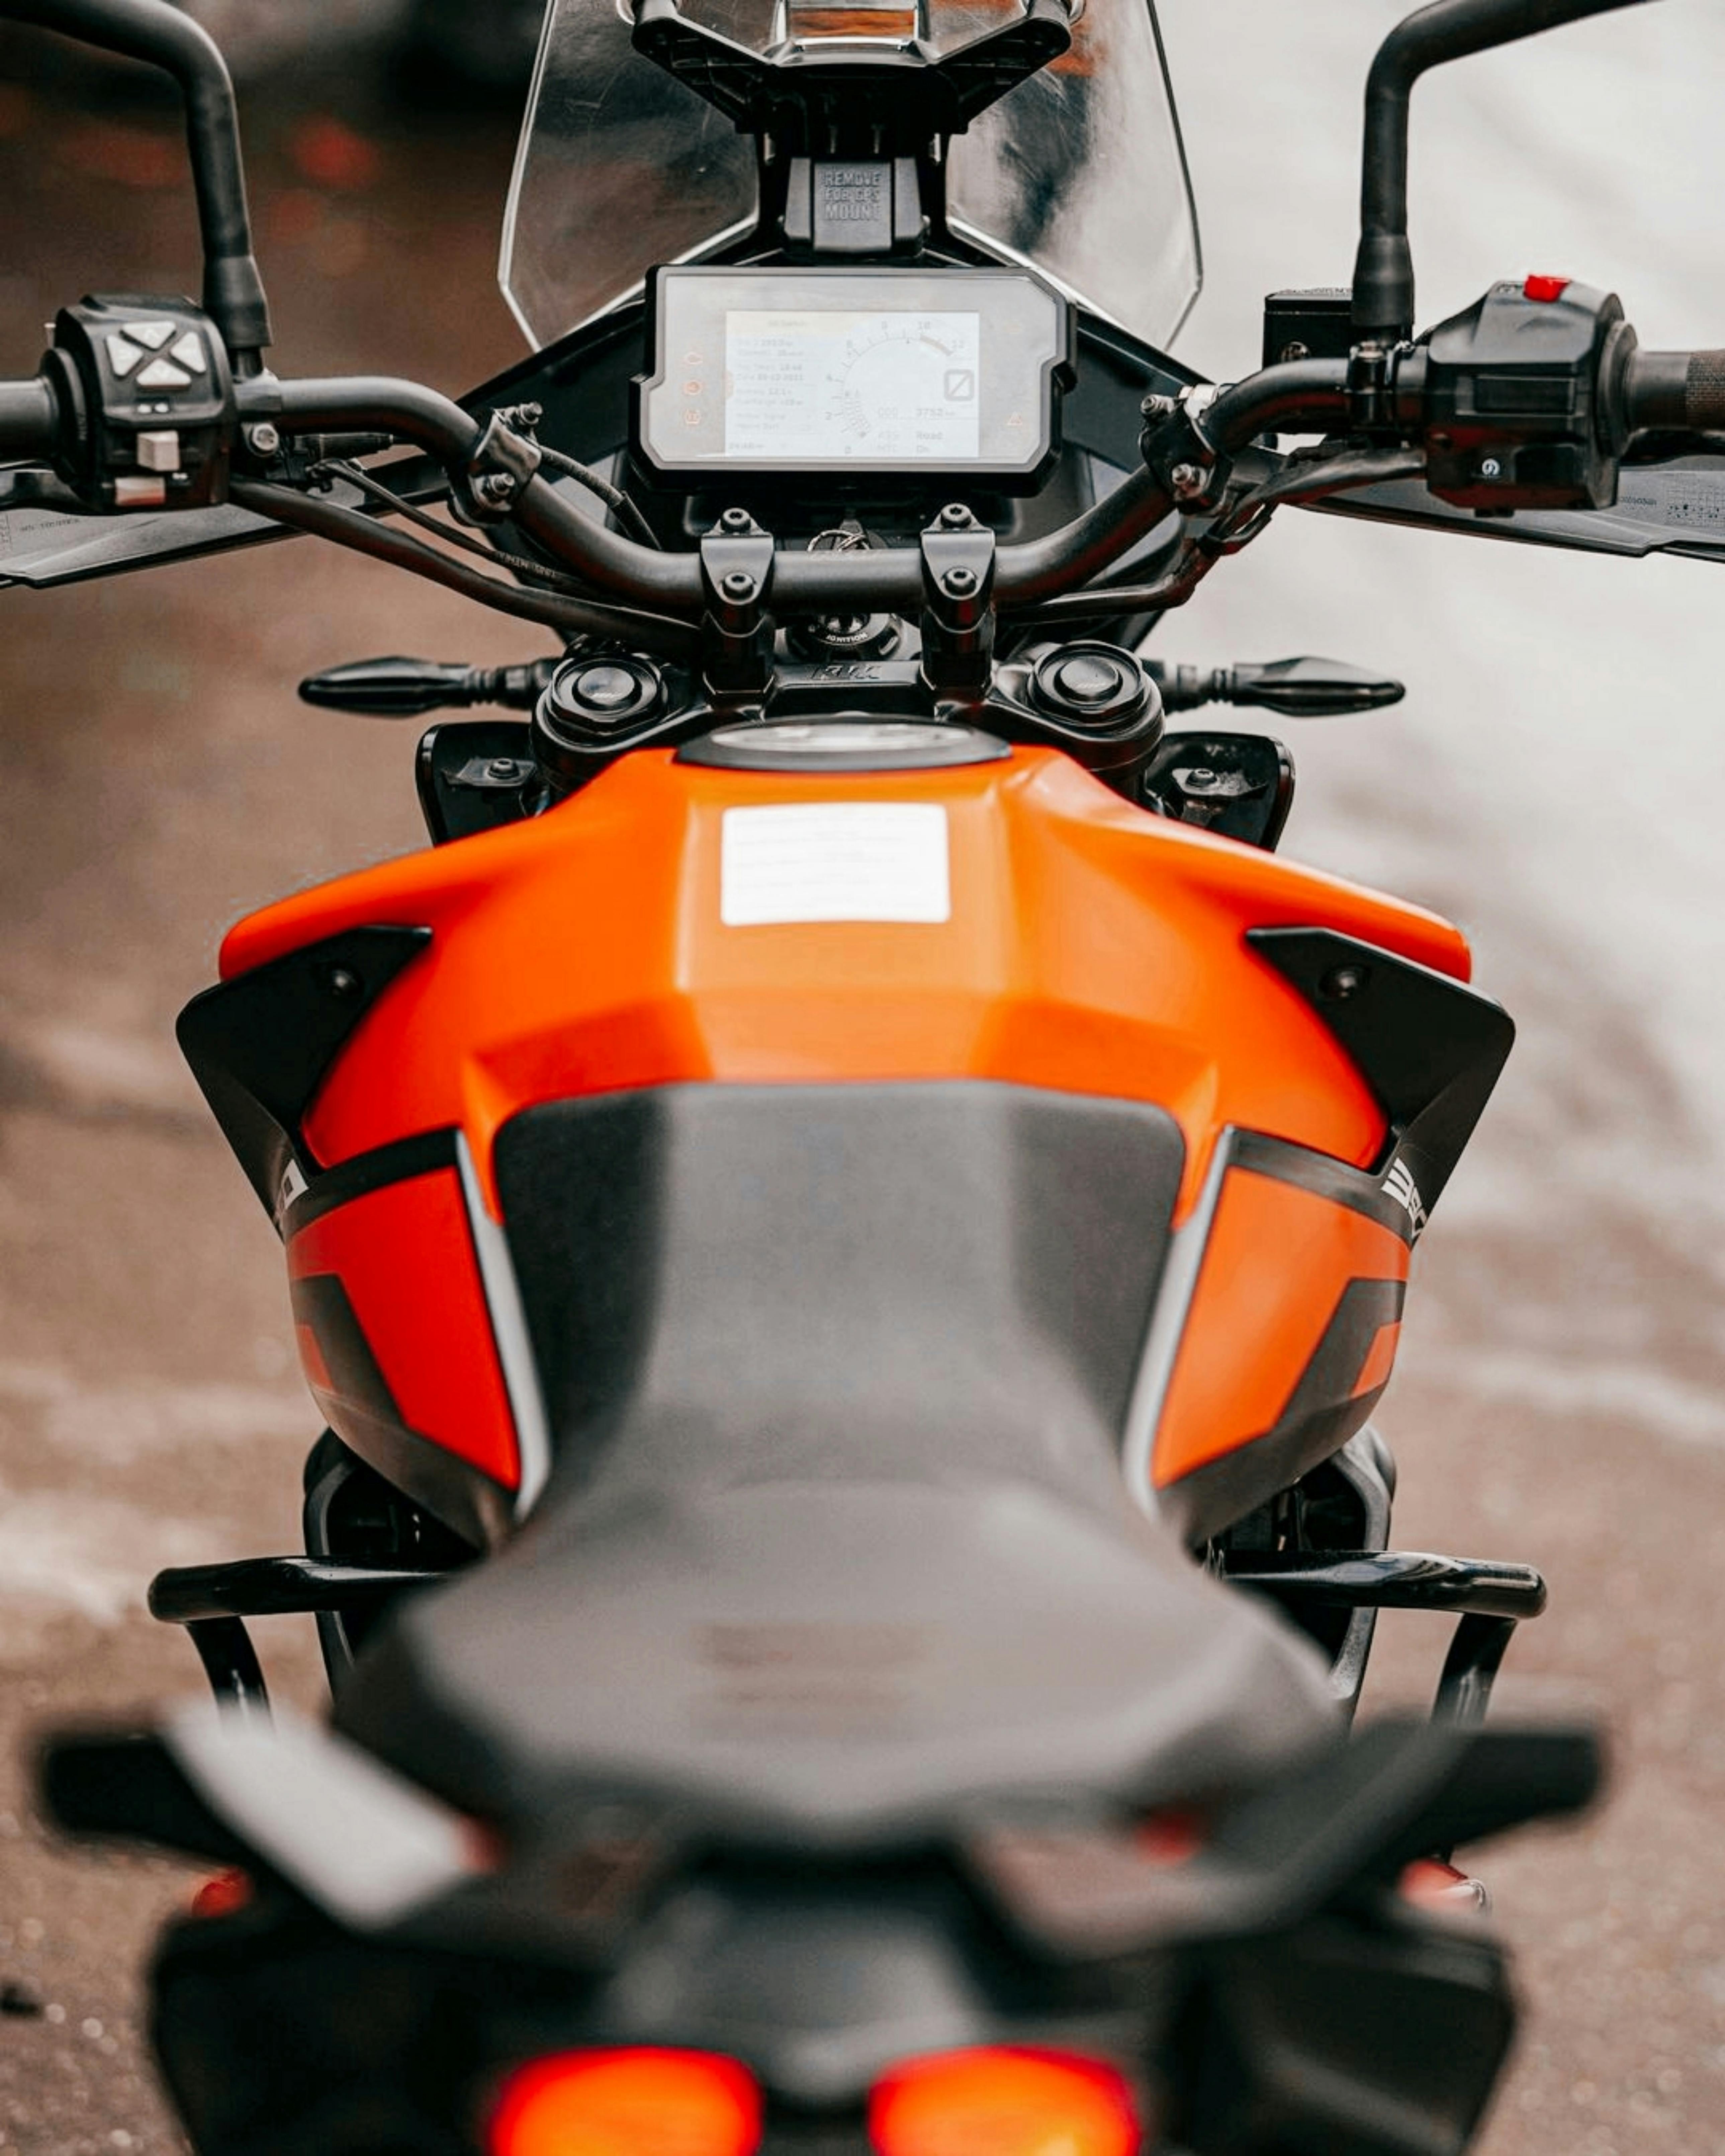 Ktm 690 Photos, Download The BEST Free Ktm 690 Stock Photos & HD Images